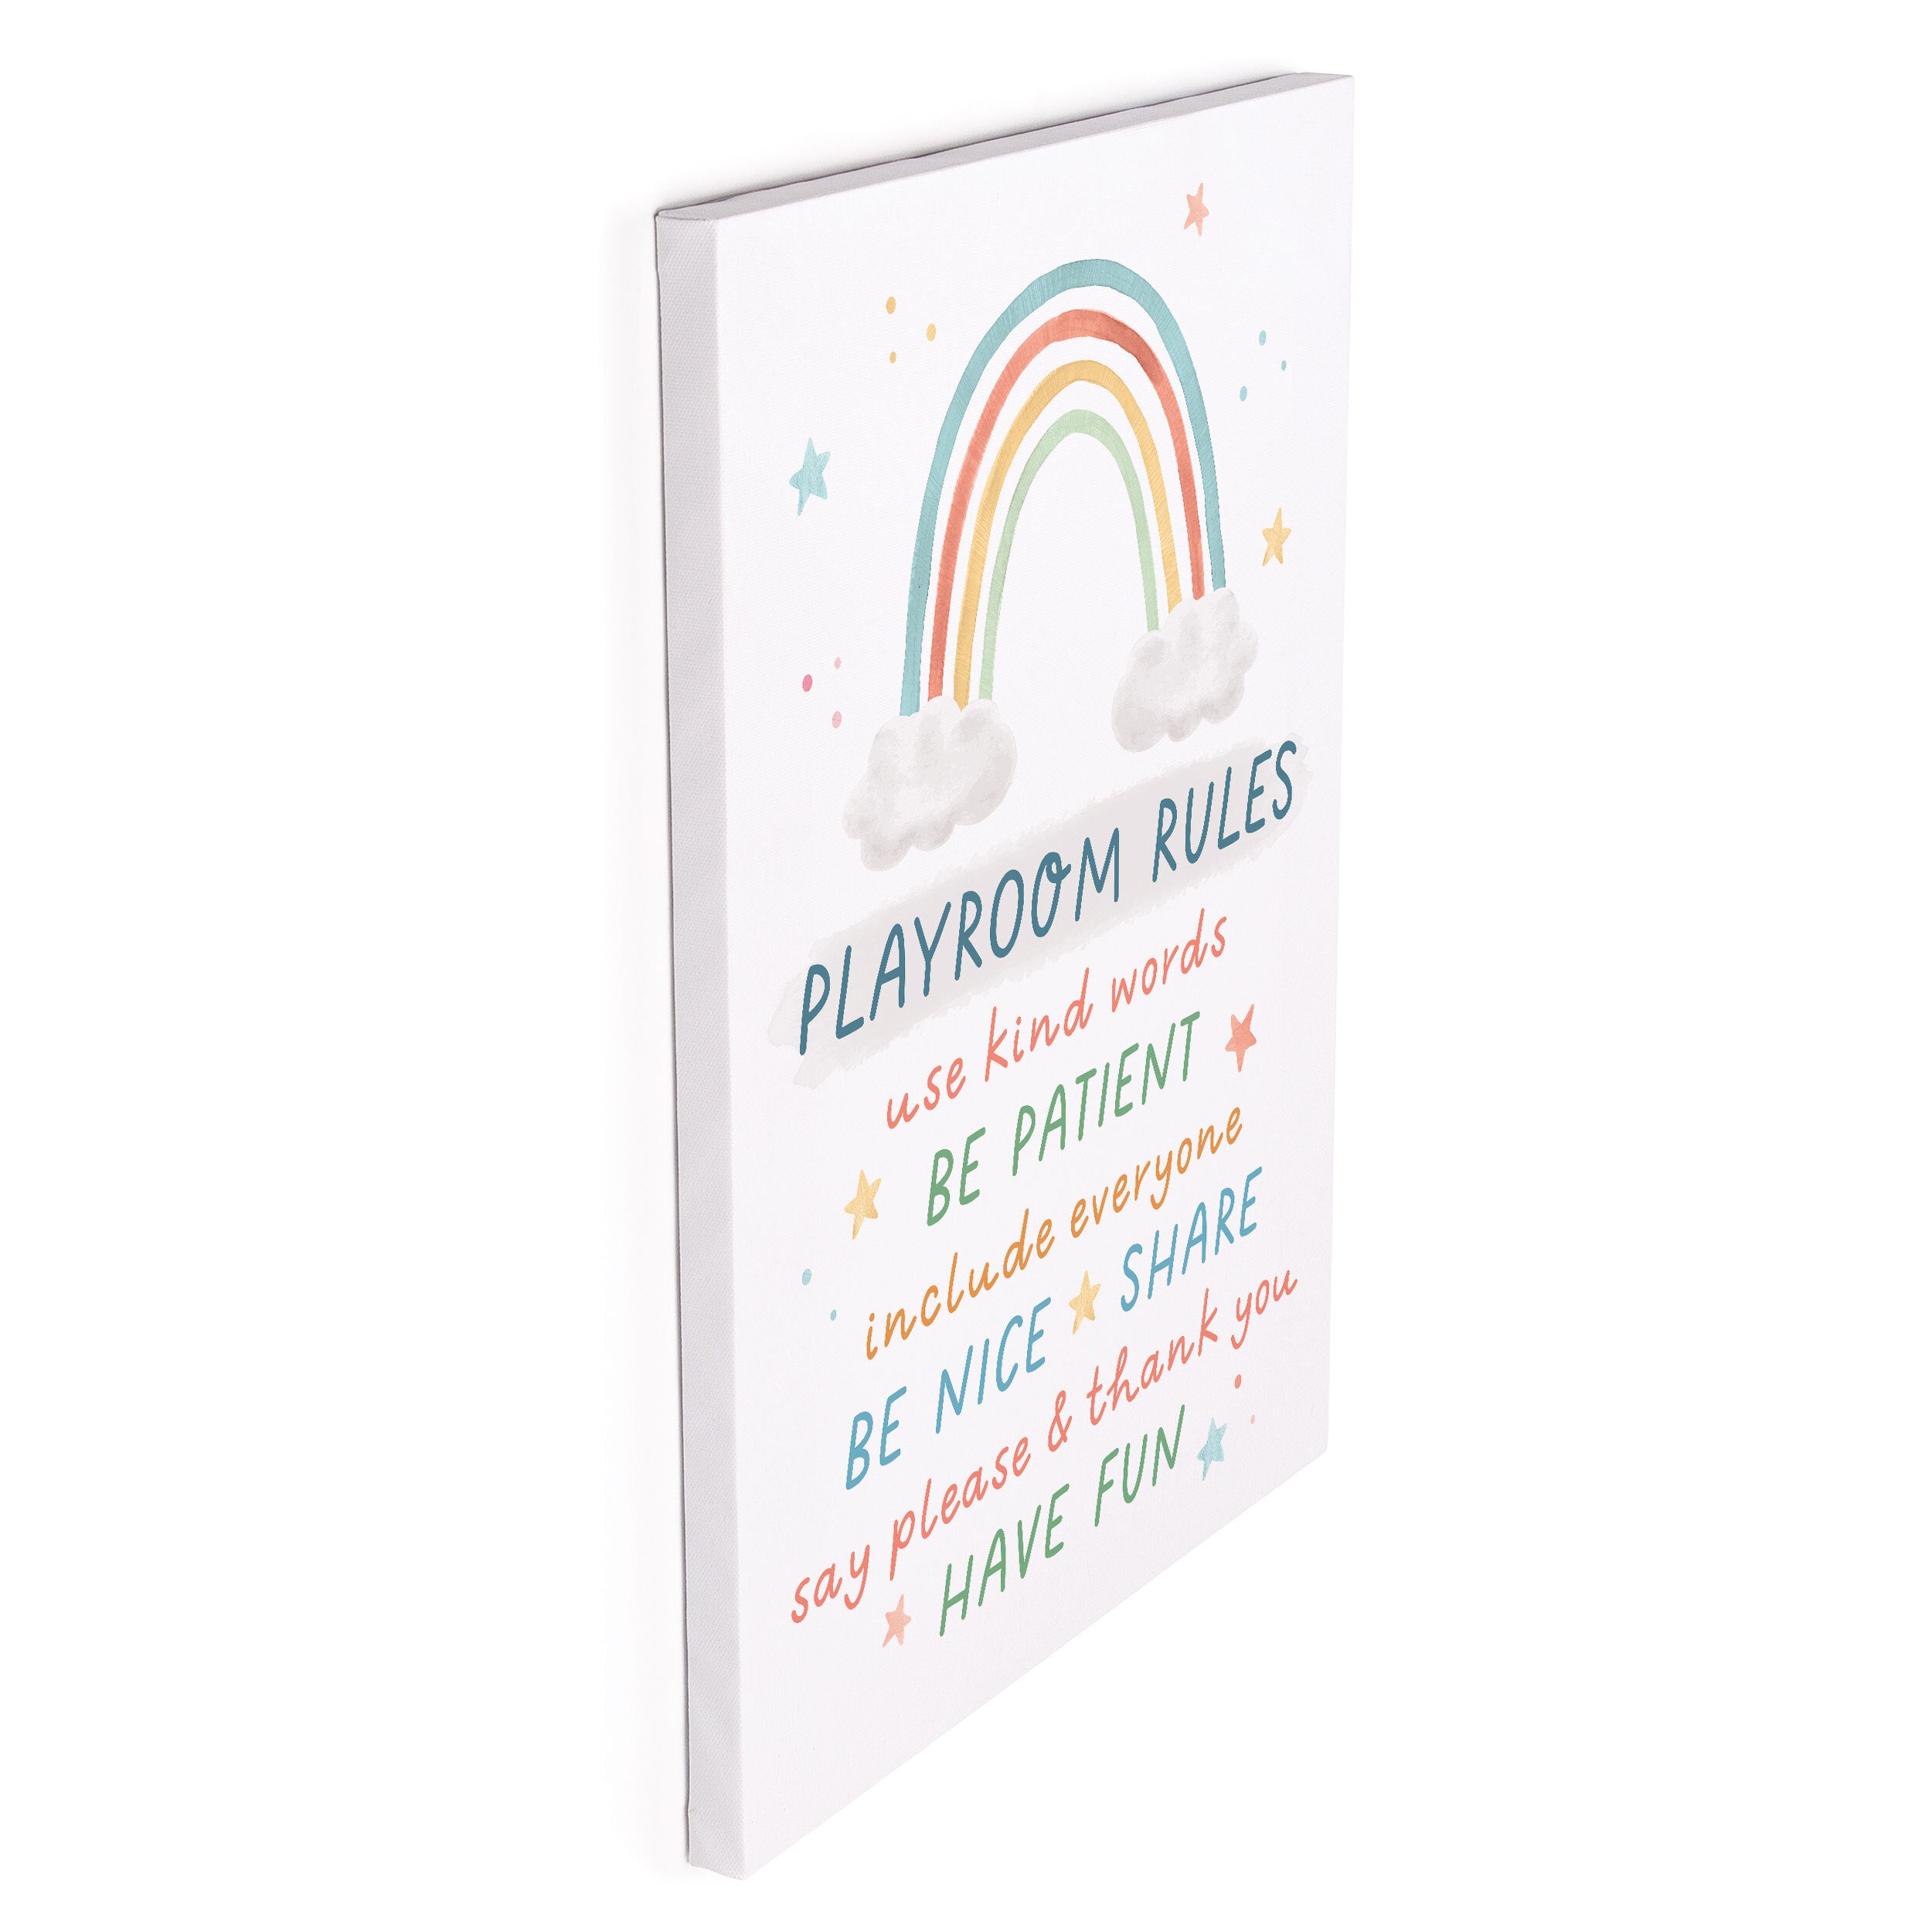 *Playroom Rules Use Kind Words Be Patient Canvas Décor